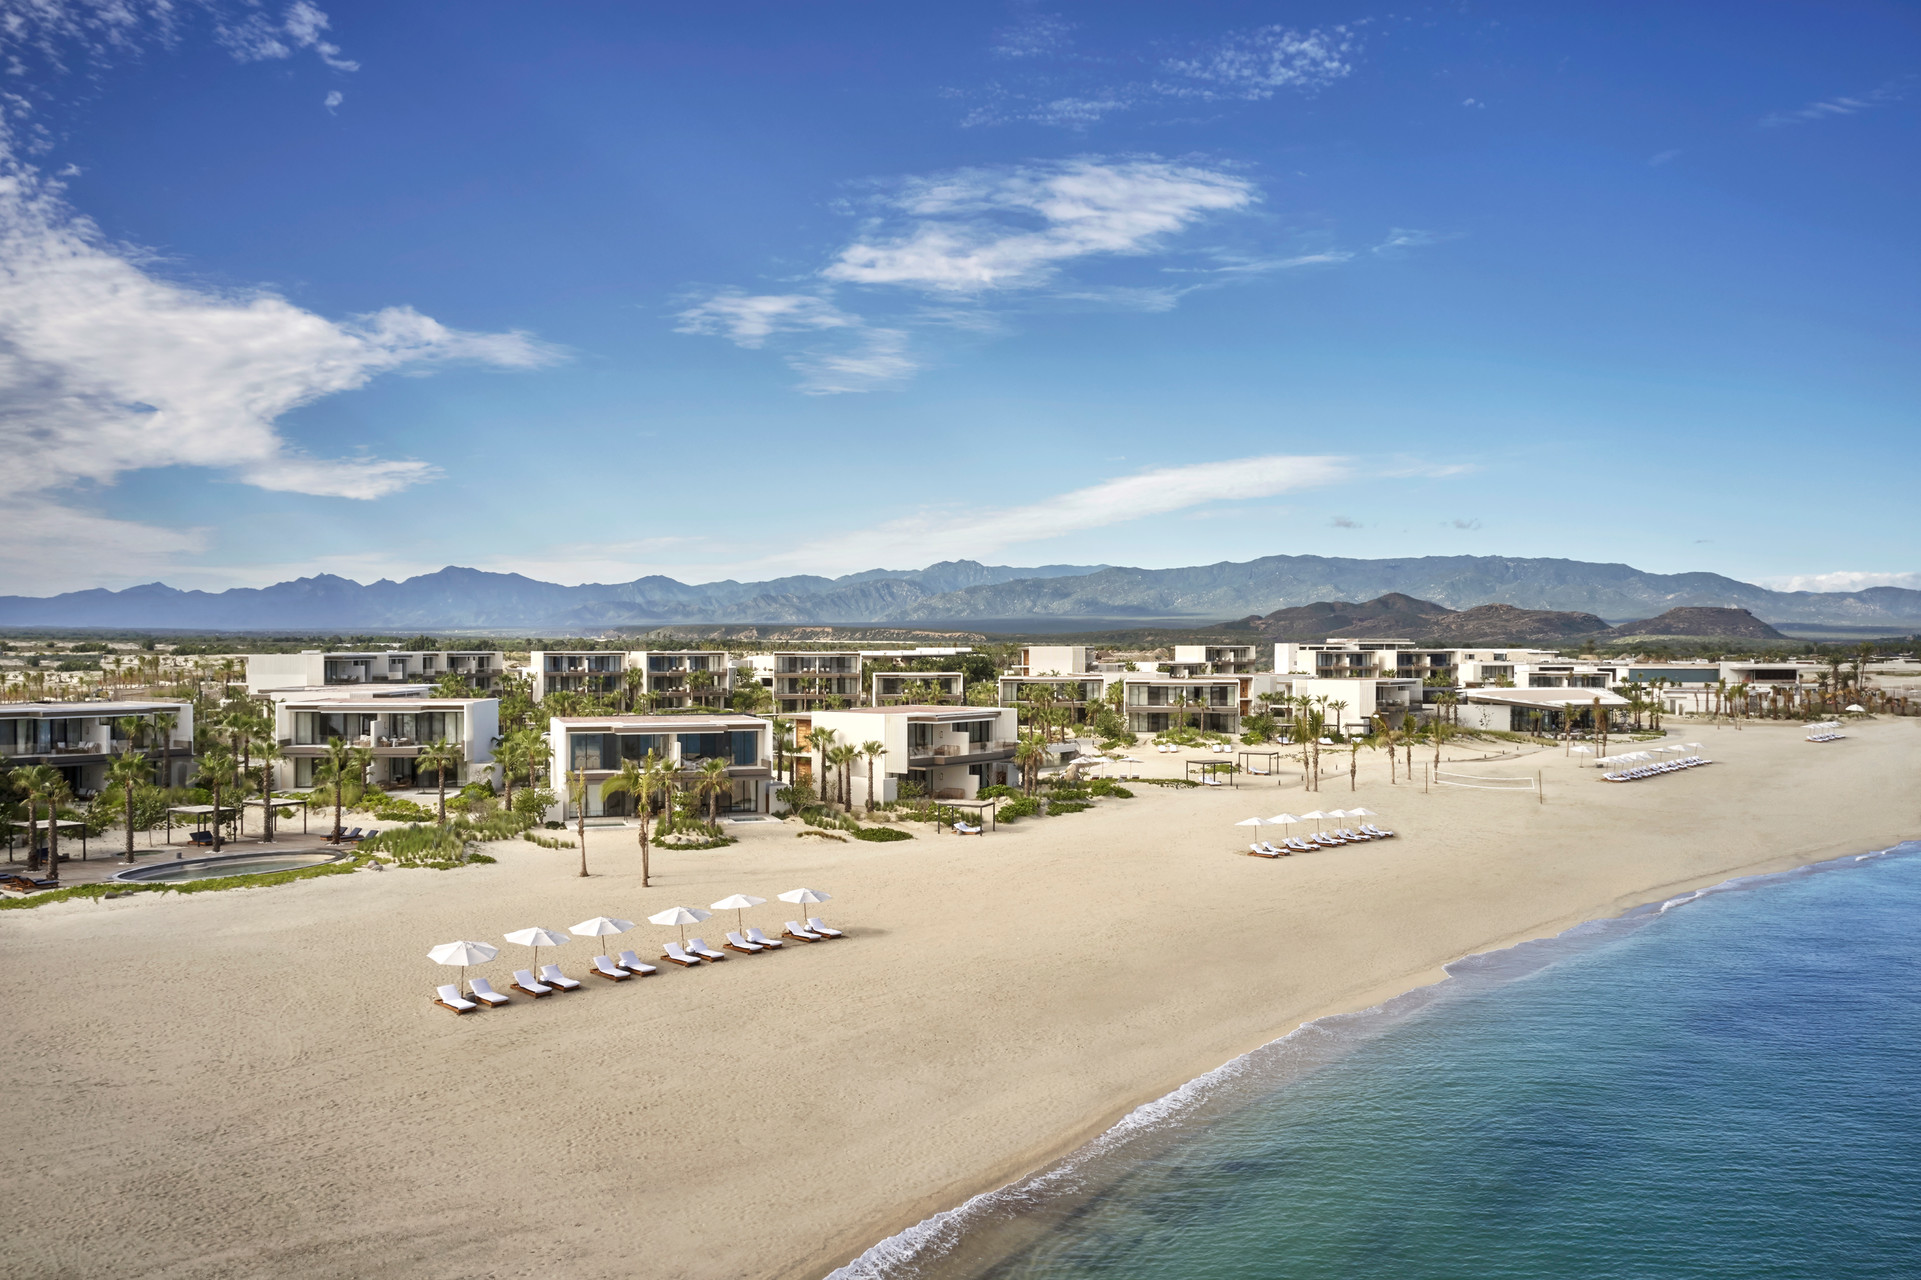 Four Seasons Resort Los Cabos at Costa Palmas: A luxurious sanctuary on the Sea of Cortez